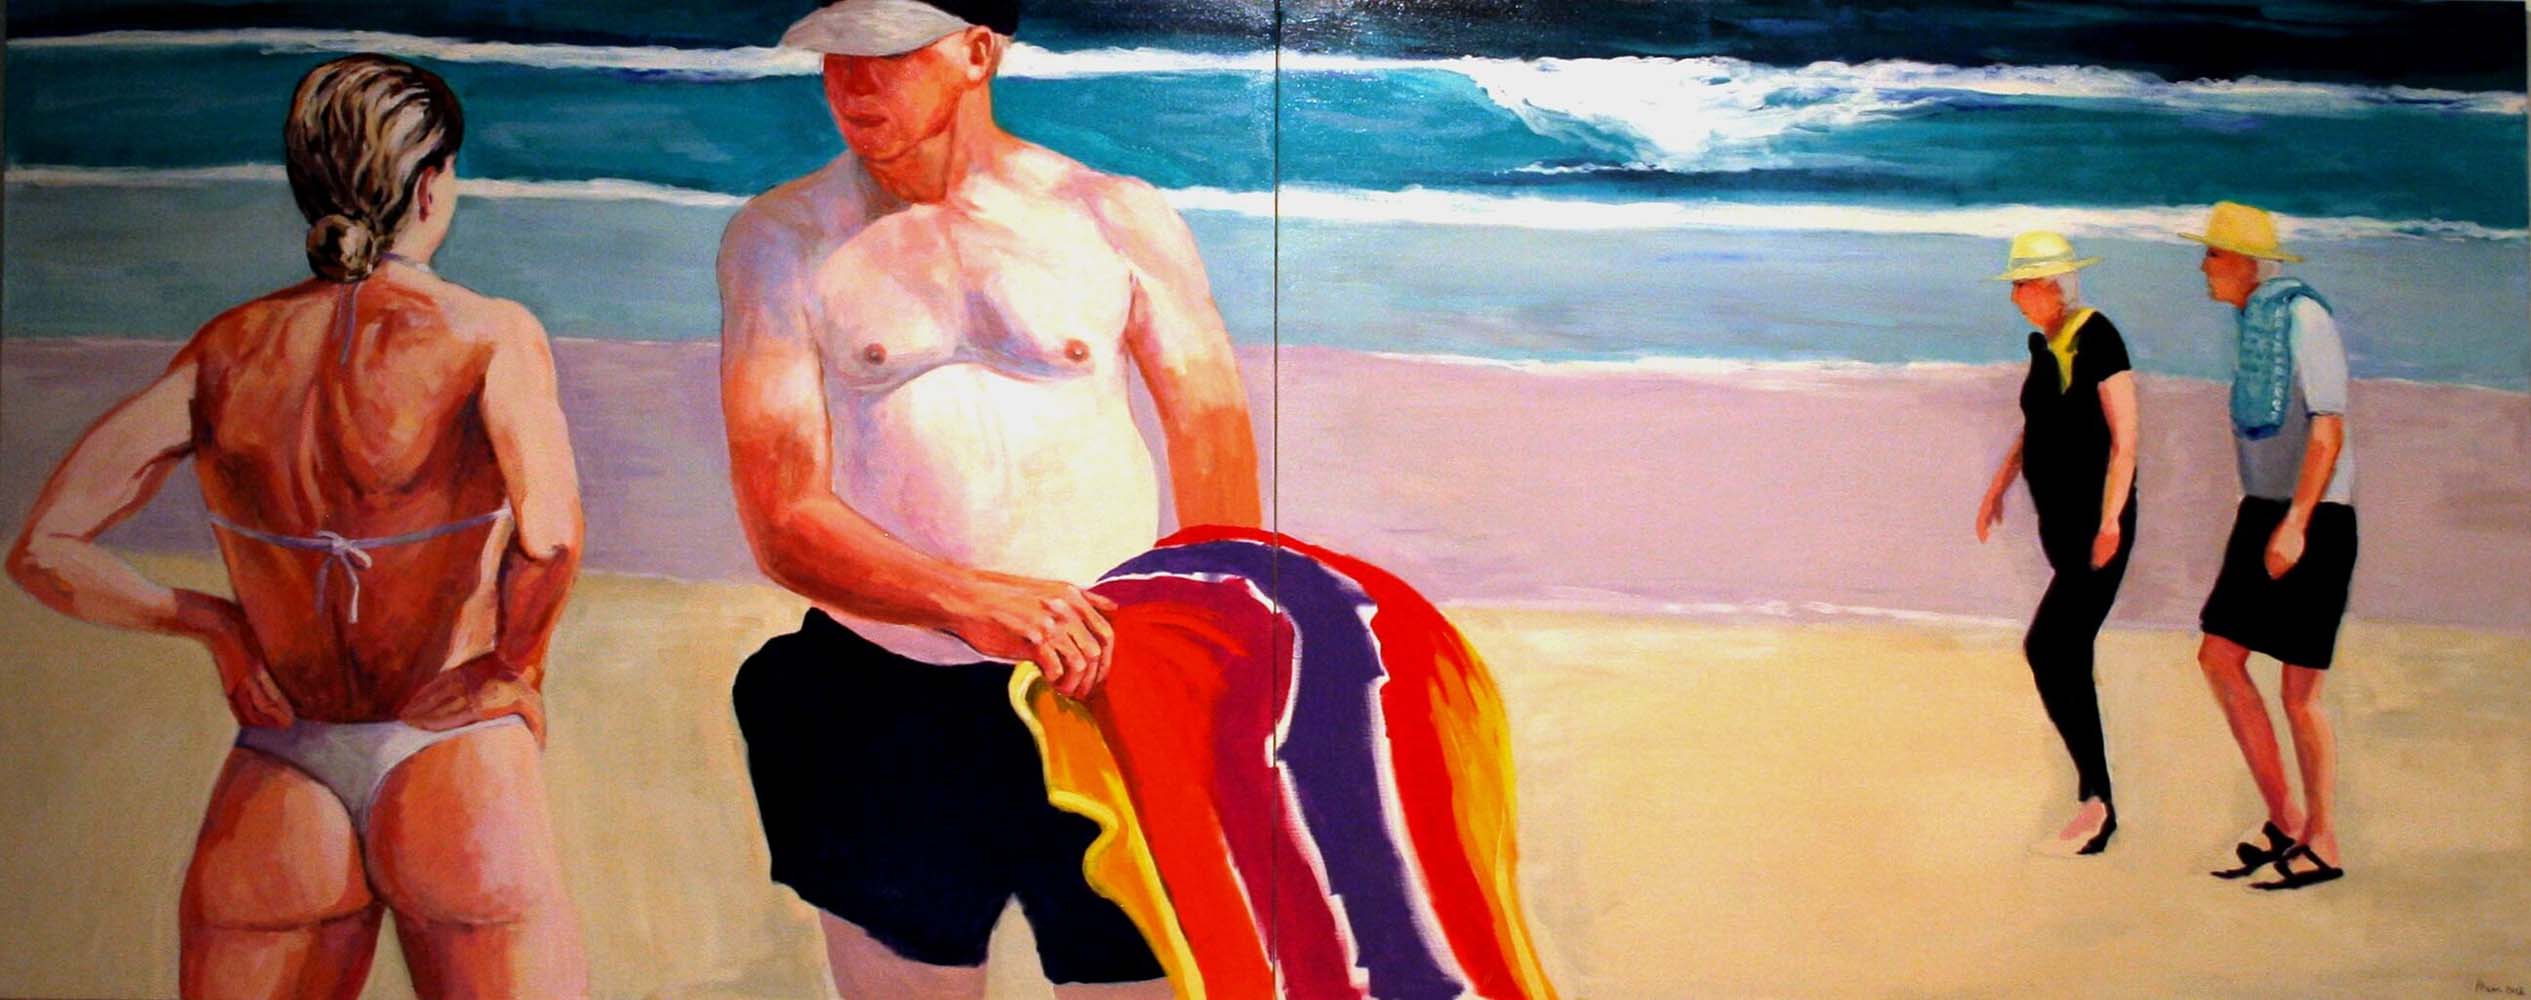 On The Beach (After Eric Fischl)